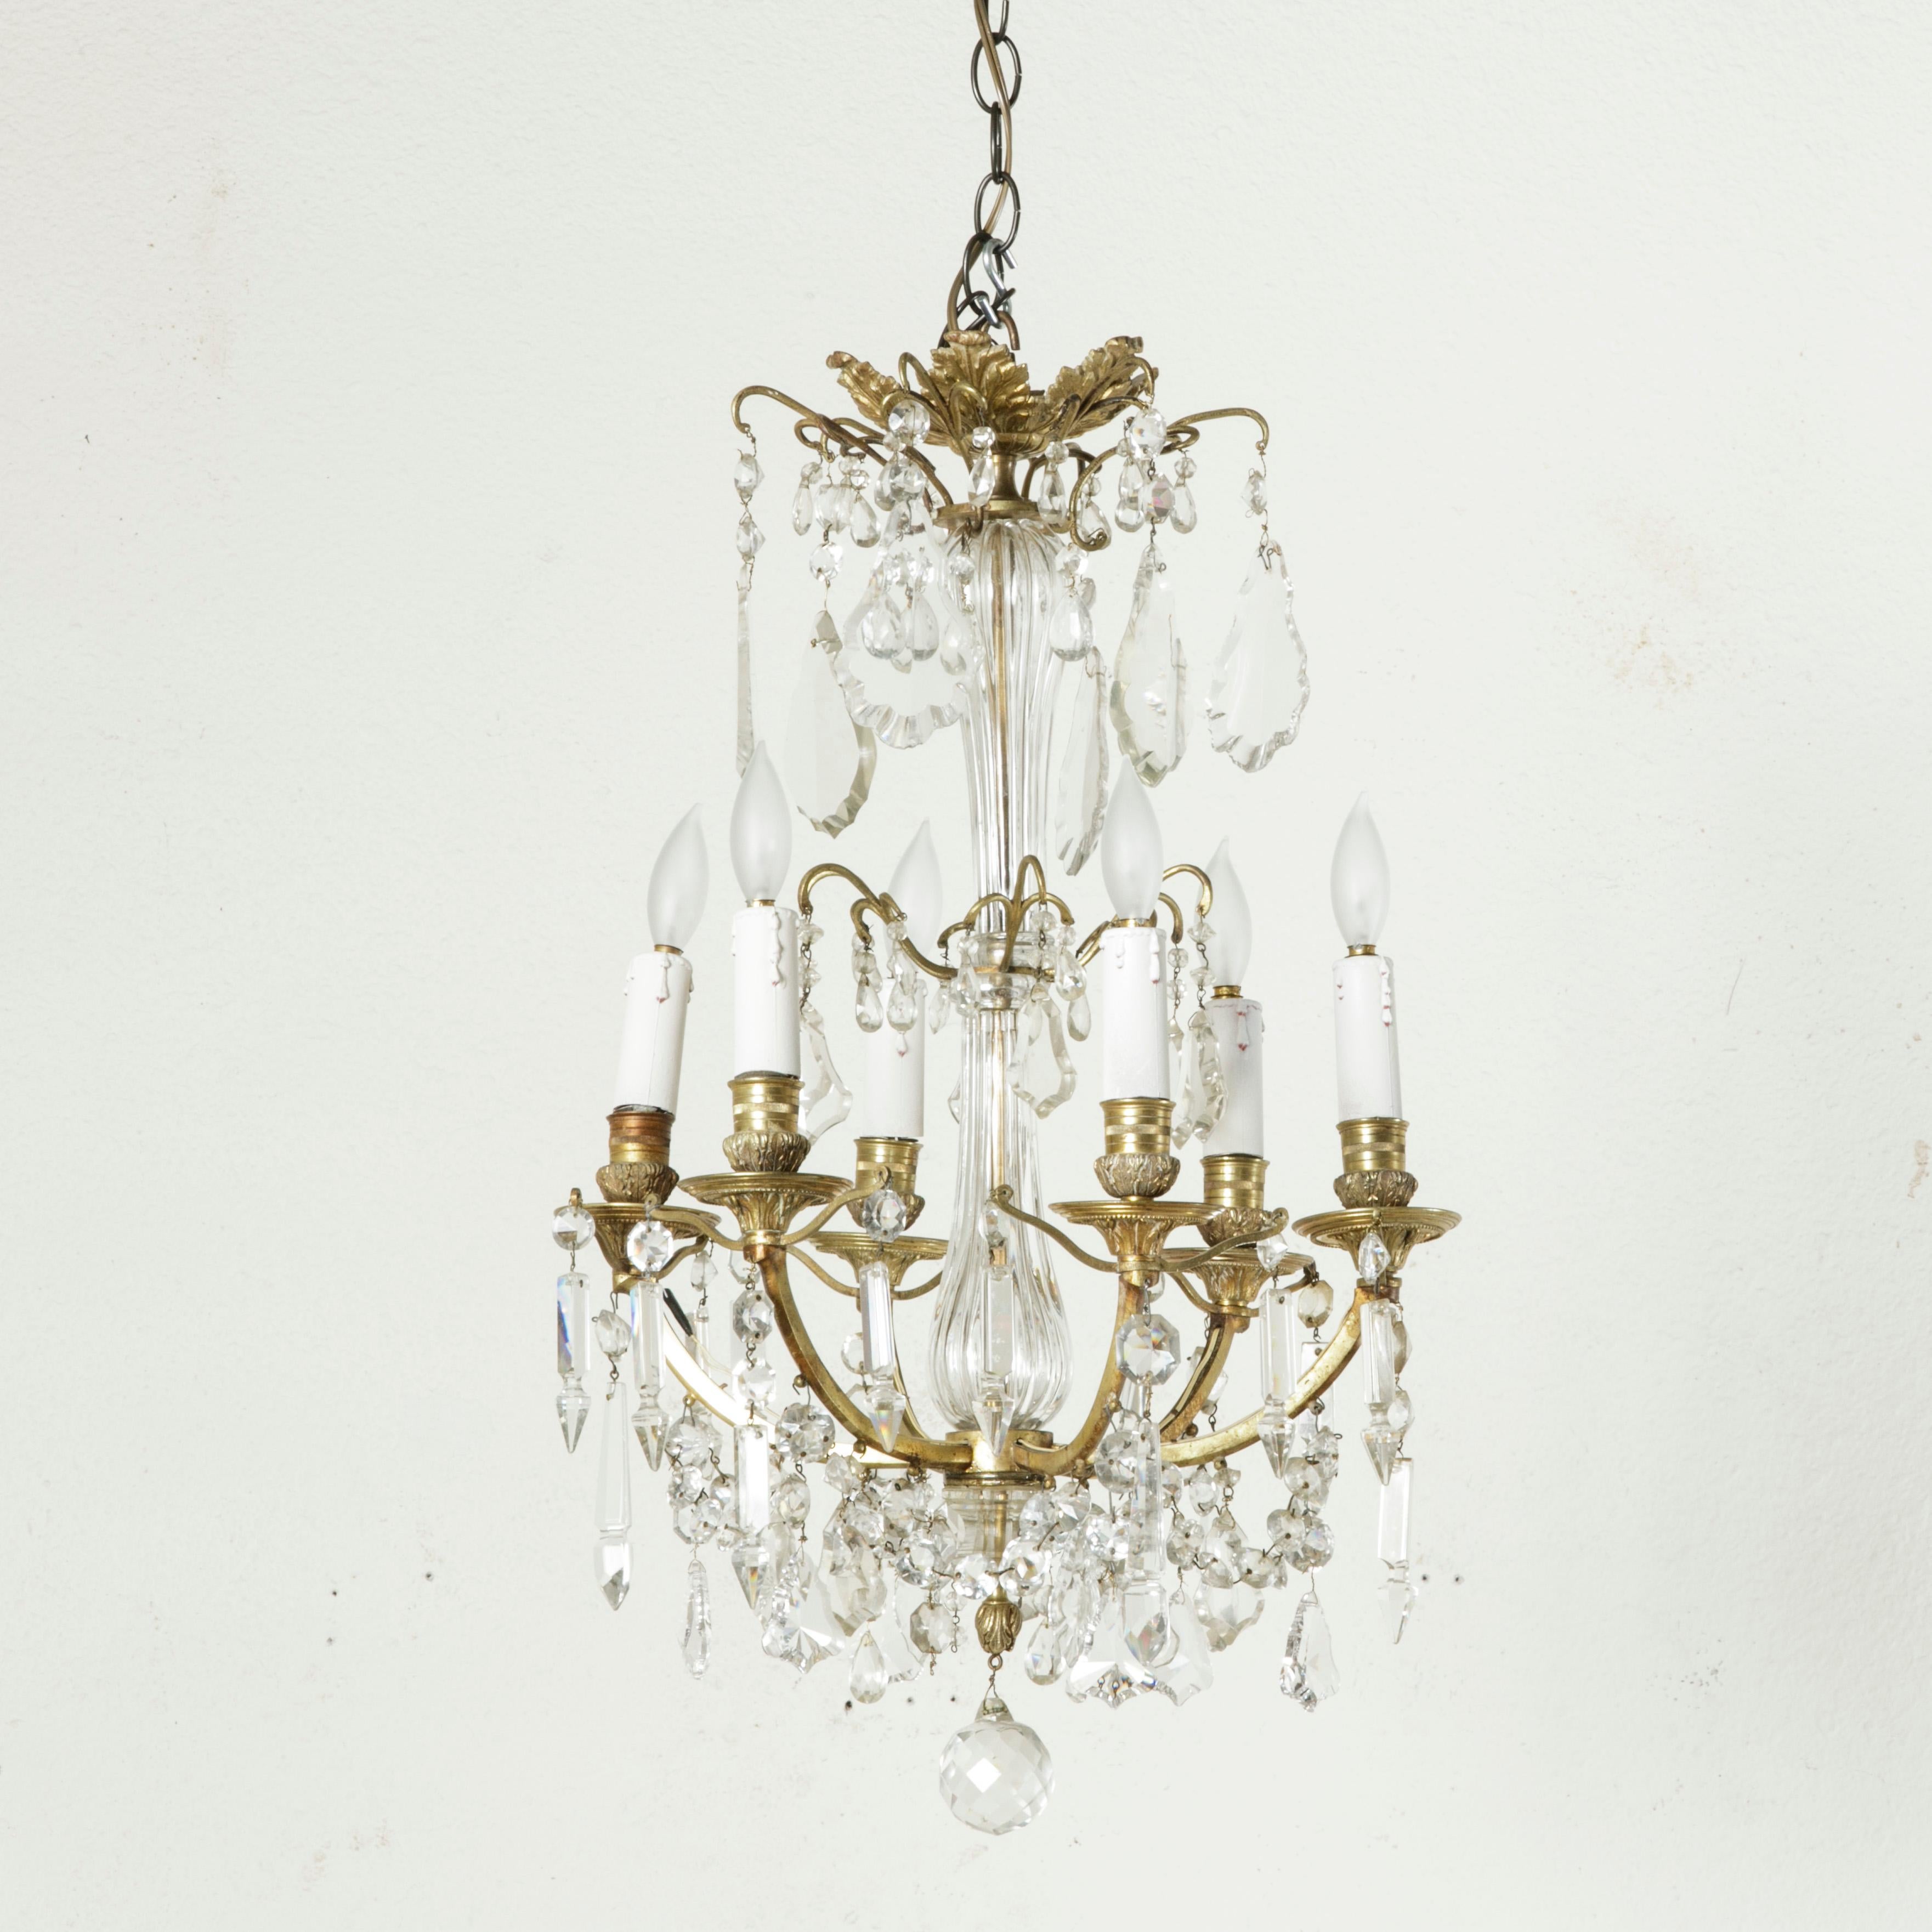 19th Century French Gilt Bronze snd Crystal Chandelier with Six Arms For Sale 4